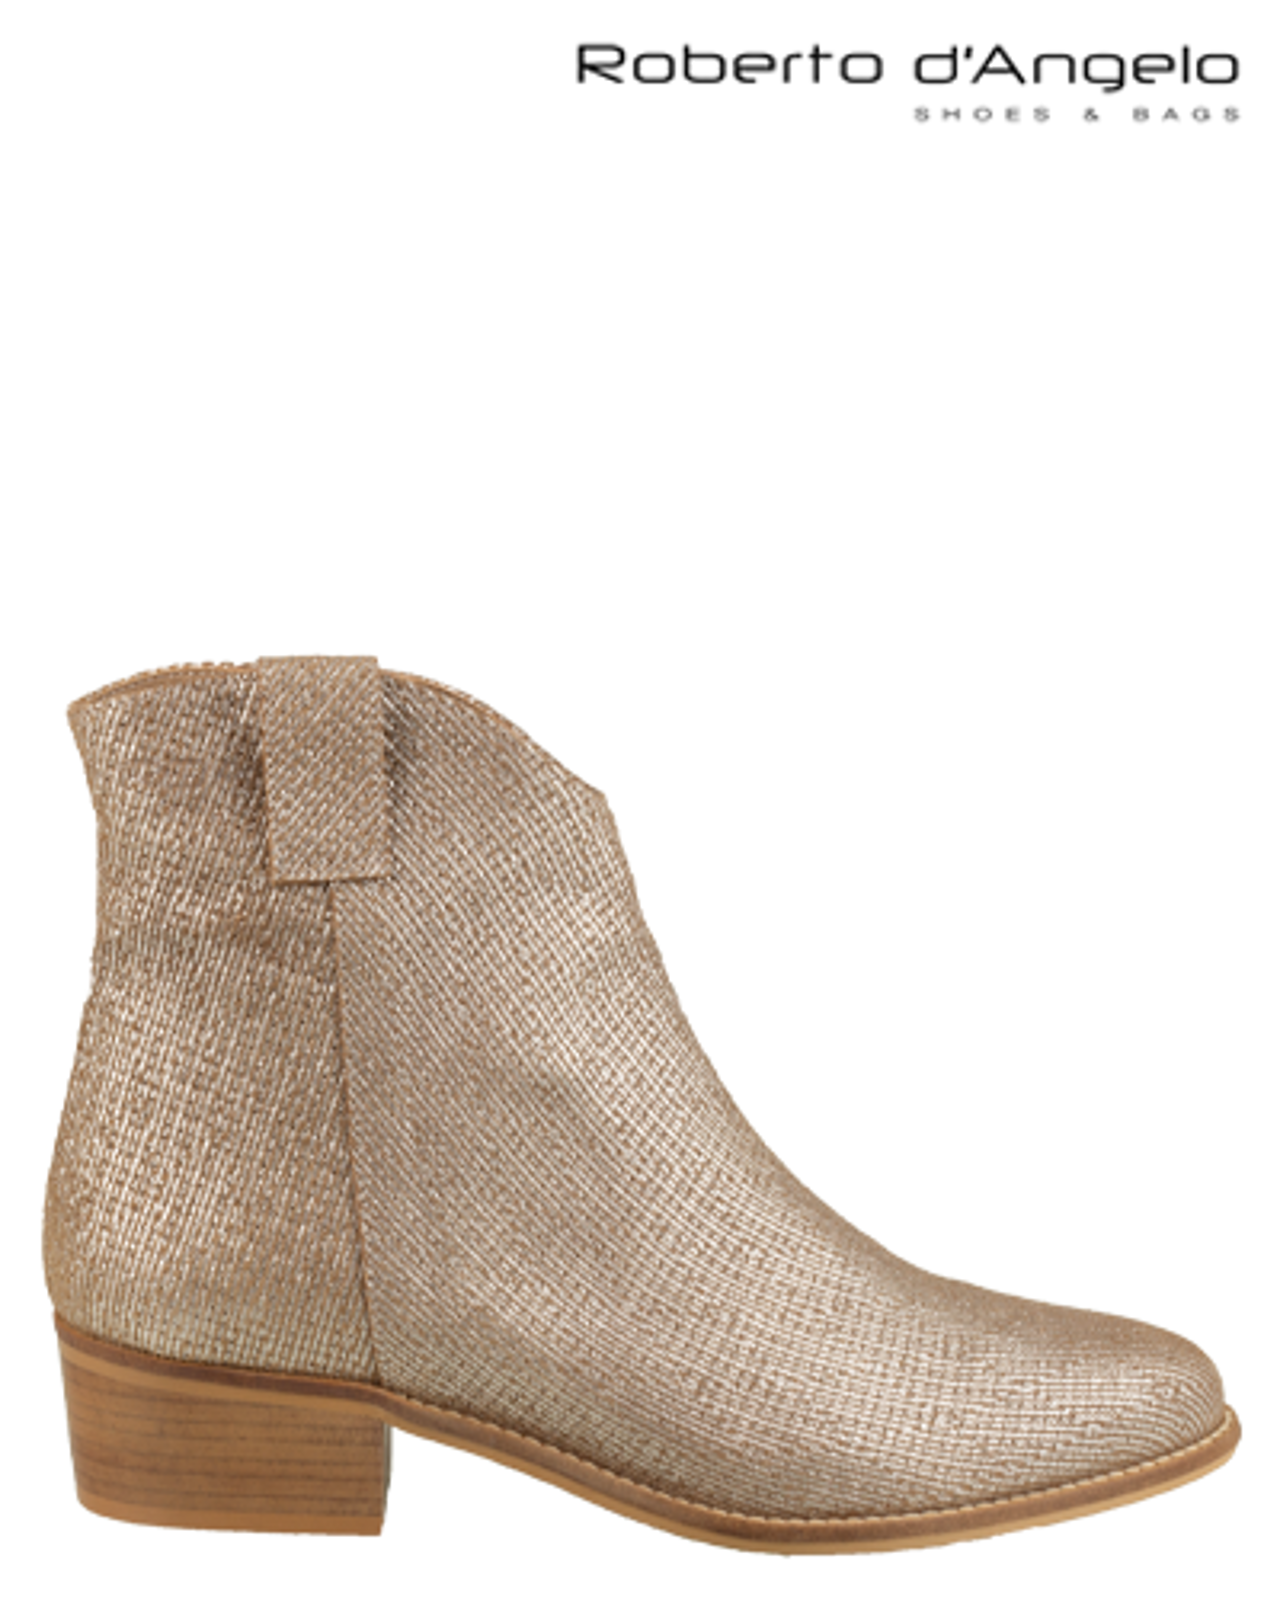 Entertain Delicious Seaport Roberto d'Angelo Plata ankle boots | MONFRANCE shoes Maastricht